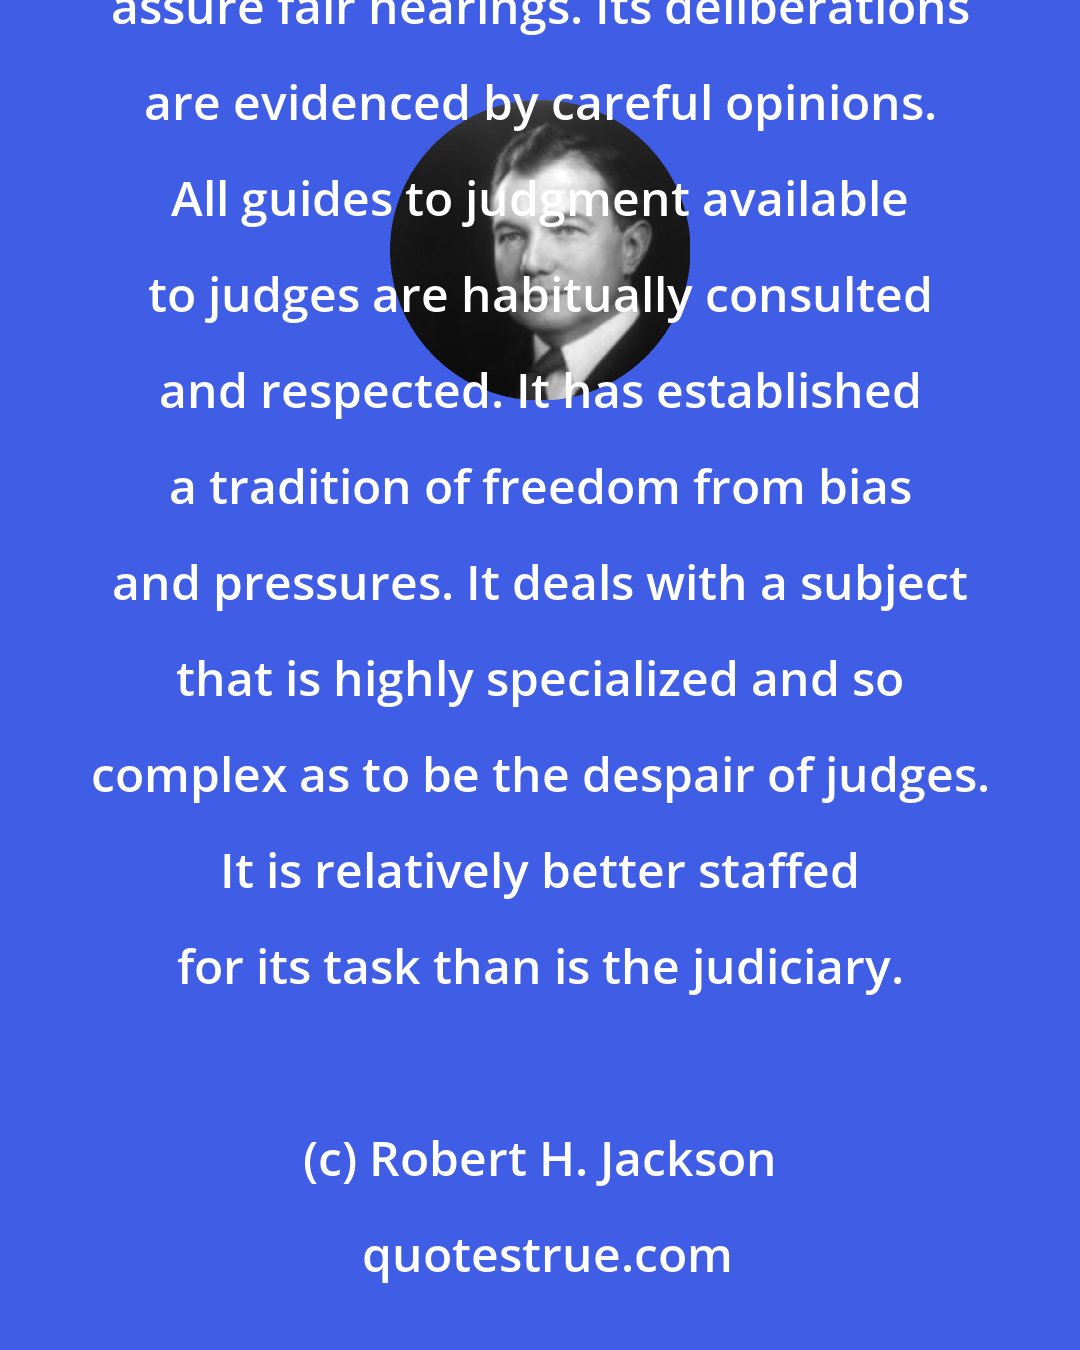 Robert H. Jackson: The Tax Court is independent, and its neutrality is not clouded by prosecuting duties. Its procedures assure fair hearings. Its deliberations are evidenced by careful opinions. All guides to judgment available to judges are habitually consulted and respected. It has established a tradition of freedom from bias and pressures. It deals with a subject that is highly specialized and so complex as to be the despair of judges. It is relatively better staffed for its task than is the judiciary.